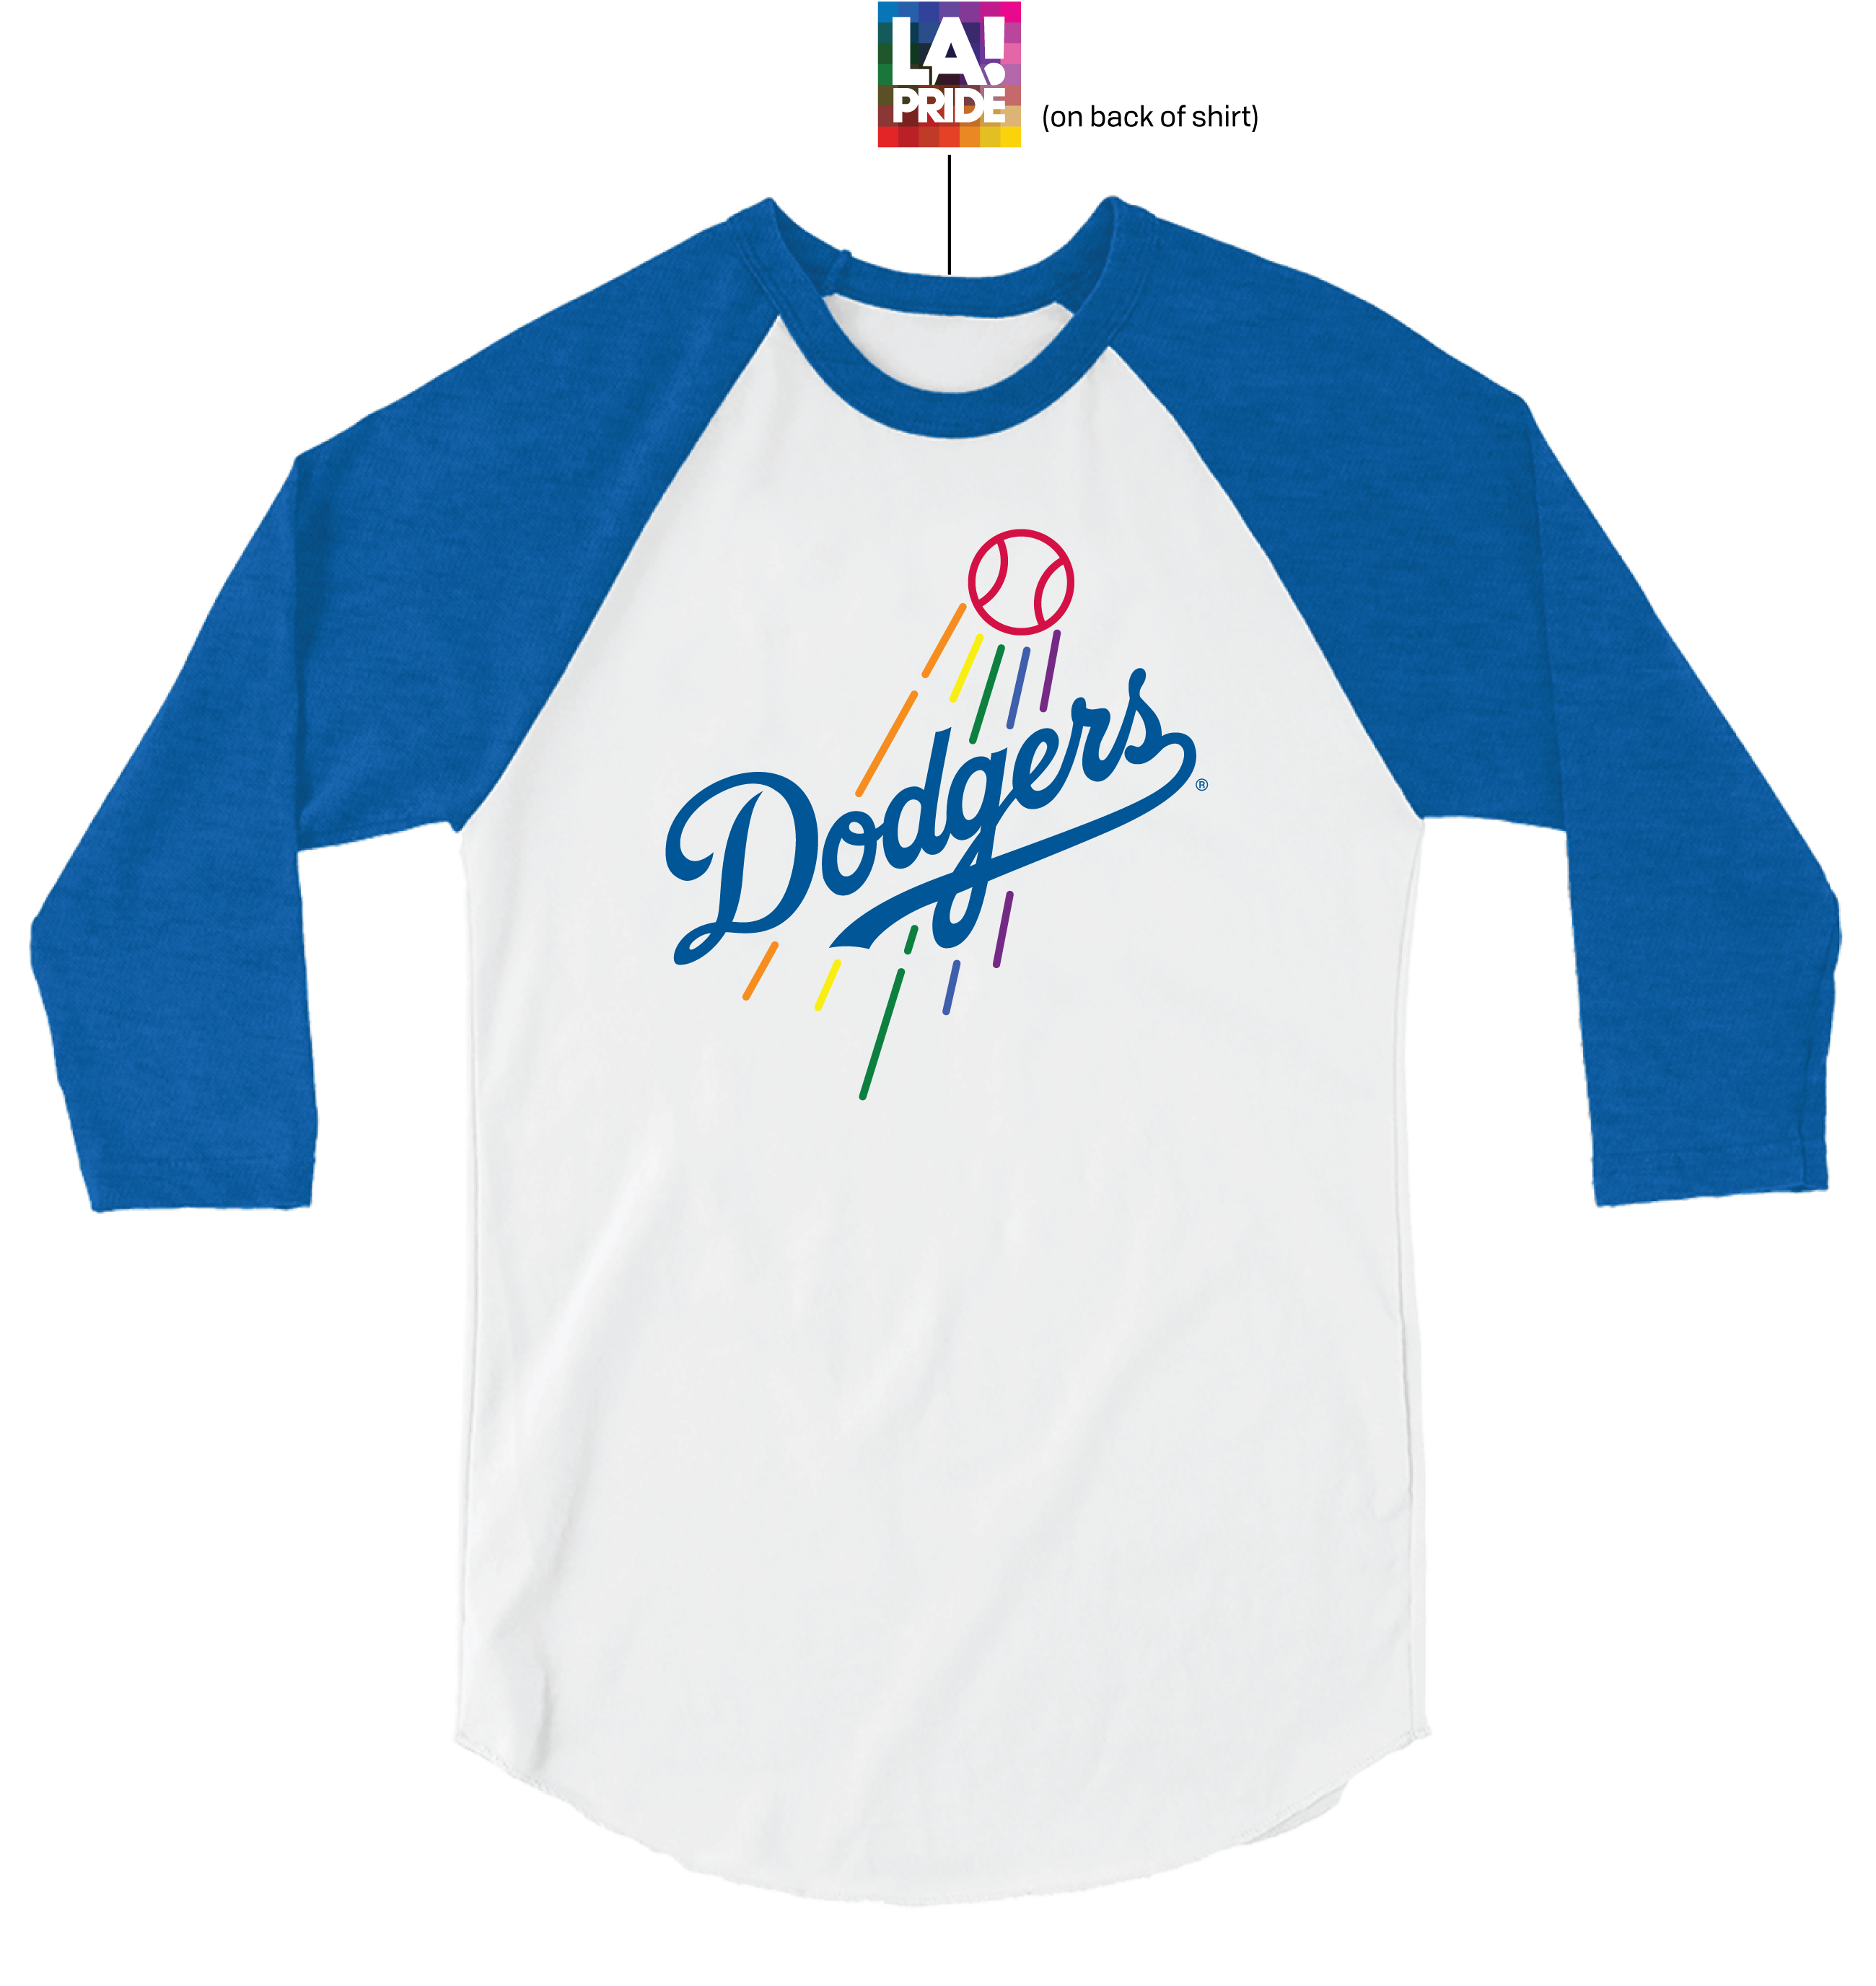 dodgers cycling jersey